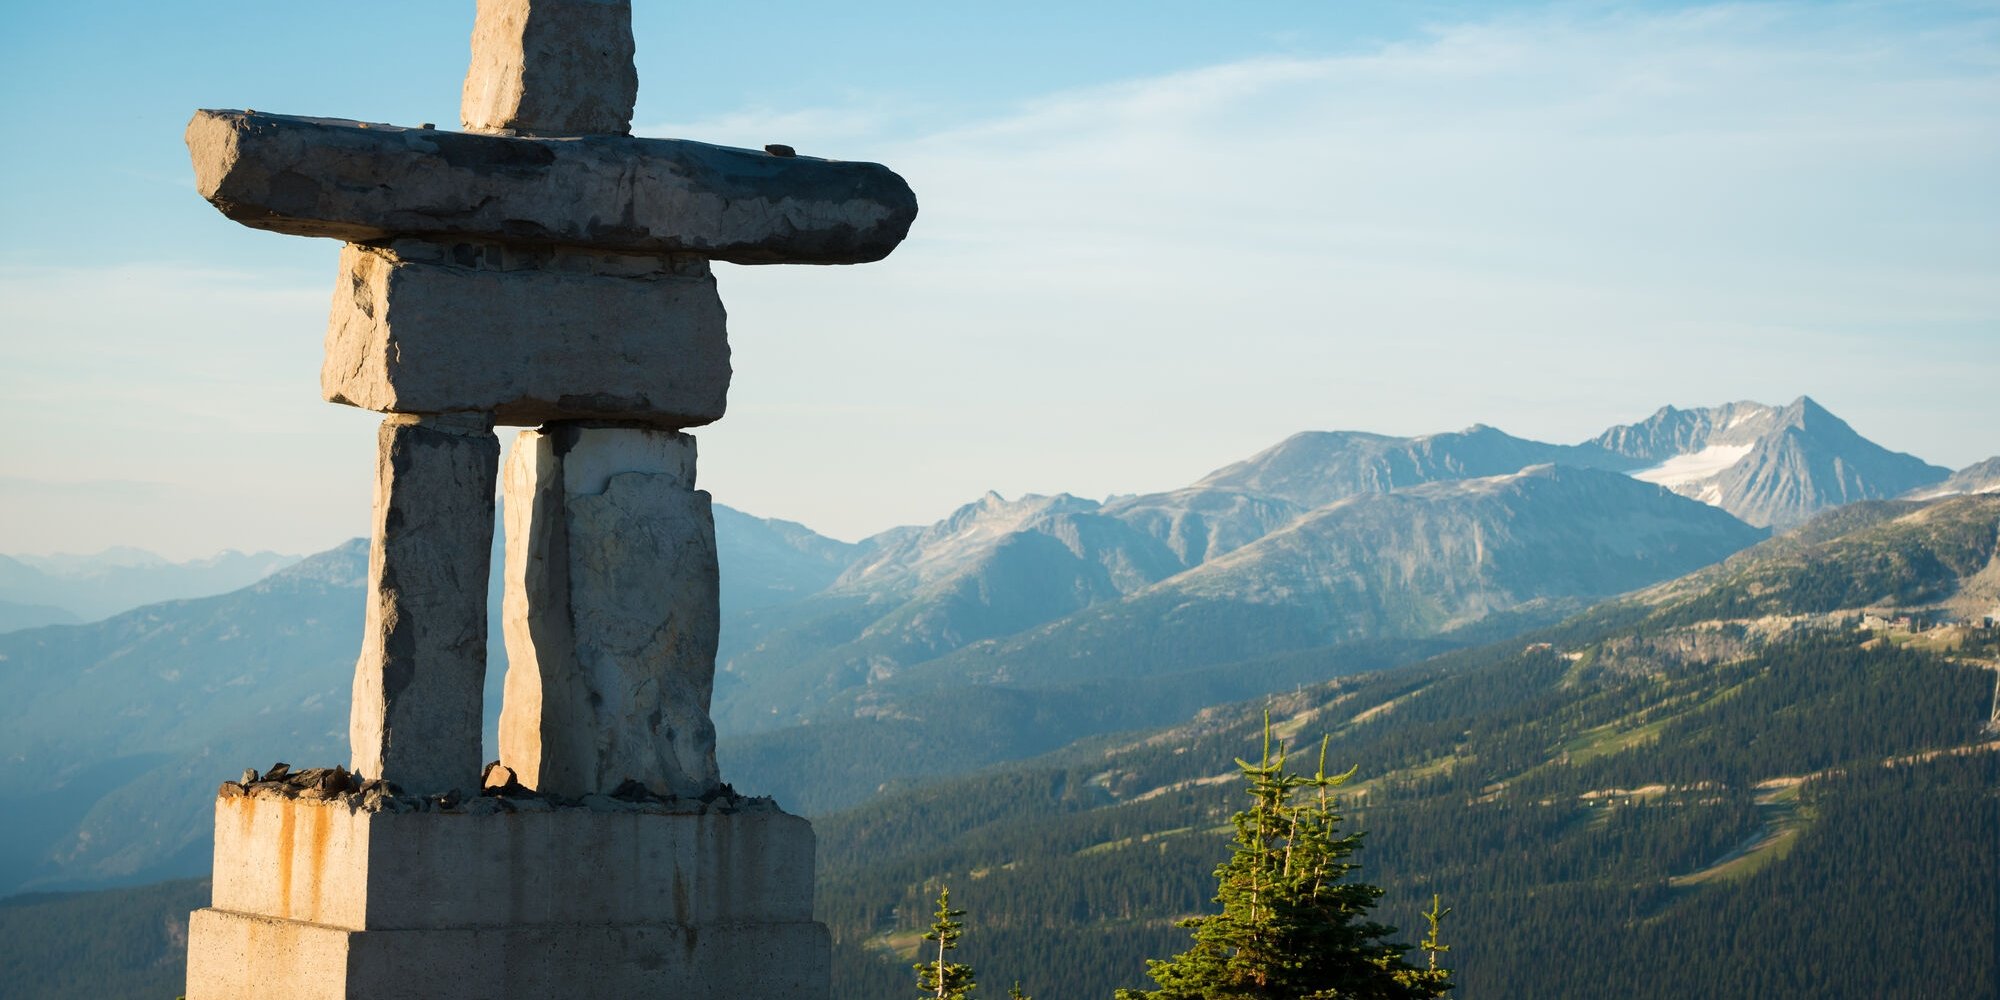 In the foreground on the left side of the frame is a giant Inukshuk statue. In the distance are forested mountains.